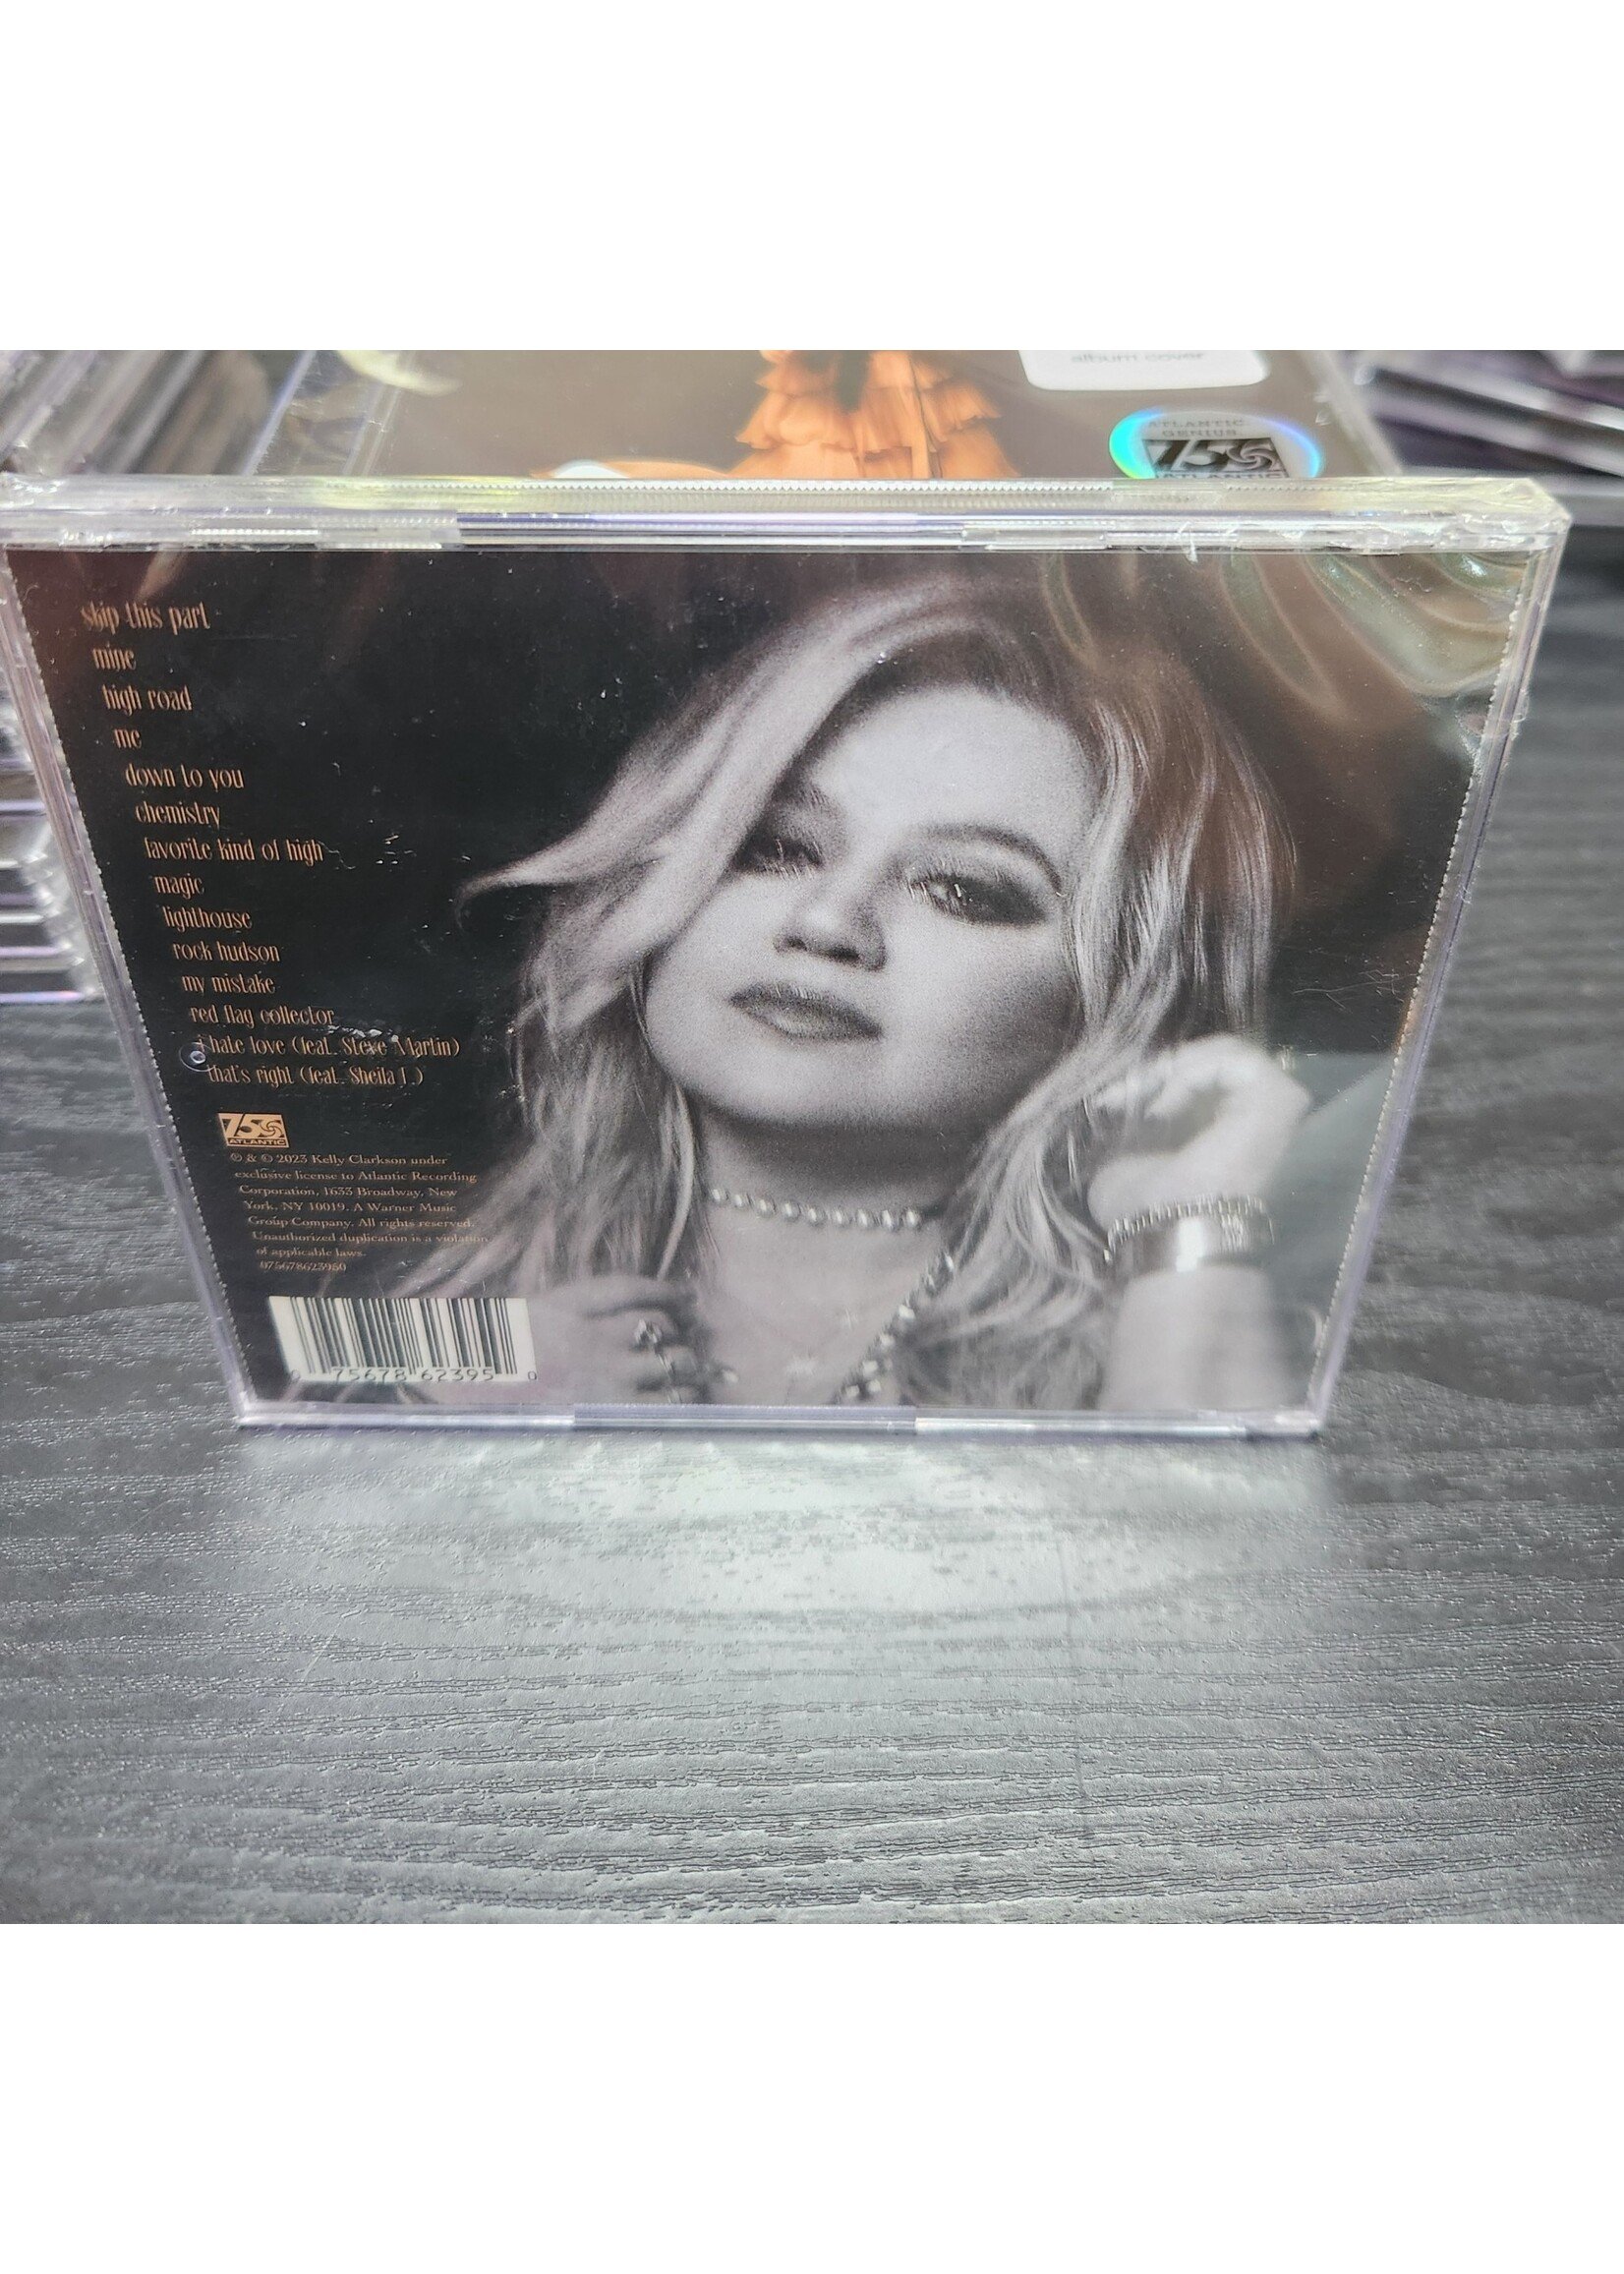 *Crack In Case* Kelly Clarkson - chemistry CD (Target Exclusive)  (Alternate Cover)